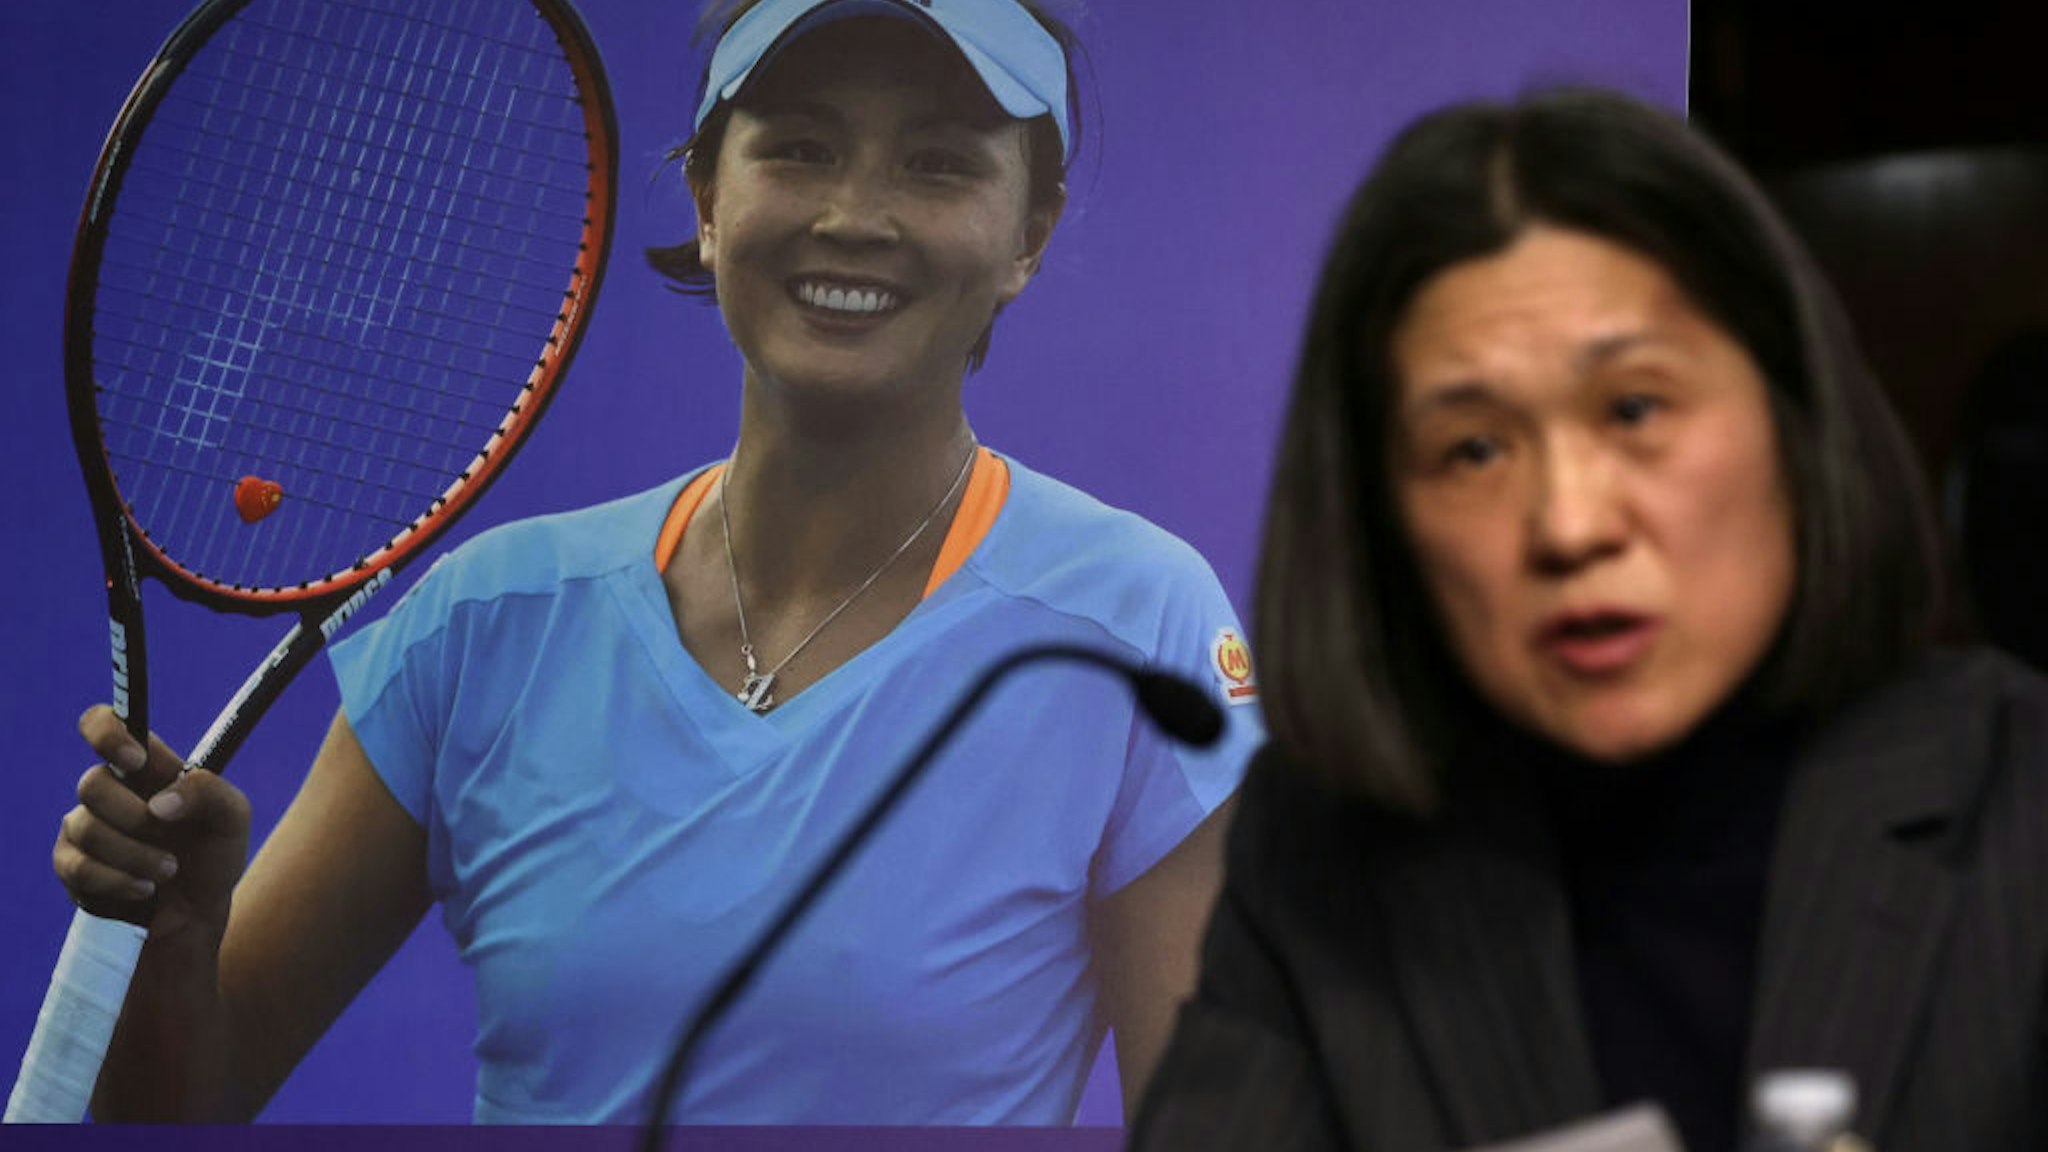 WASHINGTON, DC - FEBRUARY 03: As a photo of Chinese tennis player Peng Shuai is on display in the background, Yaxue Cao, founder and editor of China Change, testifies during a hearing before The Congressional-Executive Commission on China (CECC) at Dirksen Senate Office Building on Capitol Hill on February 3, 2022 in Washington, DC. CECC held a hearing on "The Beijing Olympics and the Faces of Repression." (Photo by Alex Wong/Getty Images)